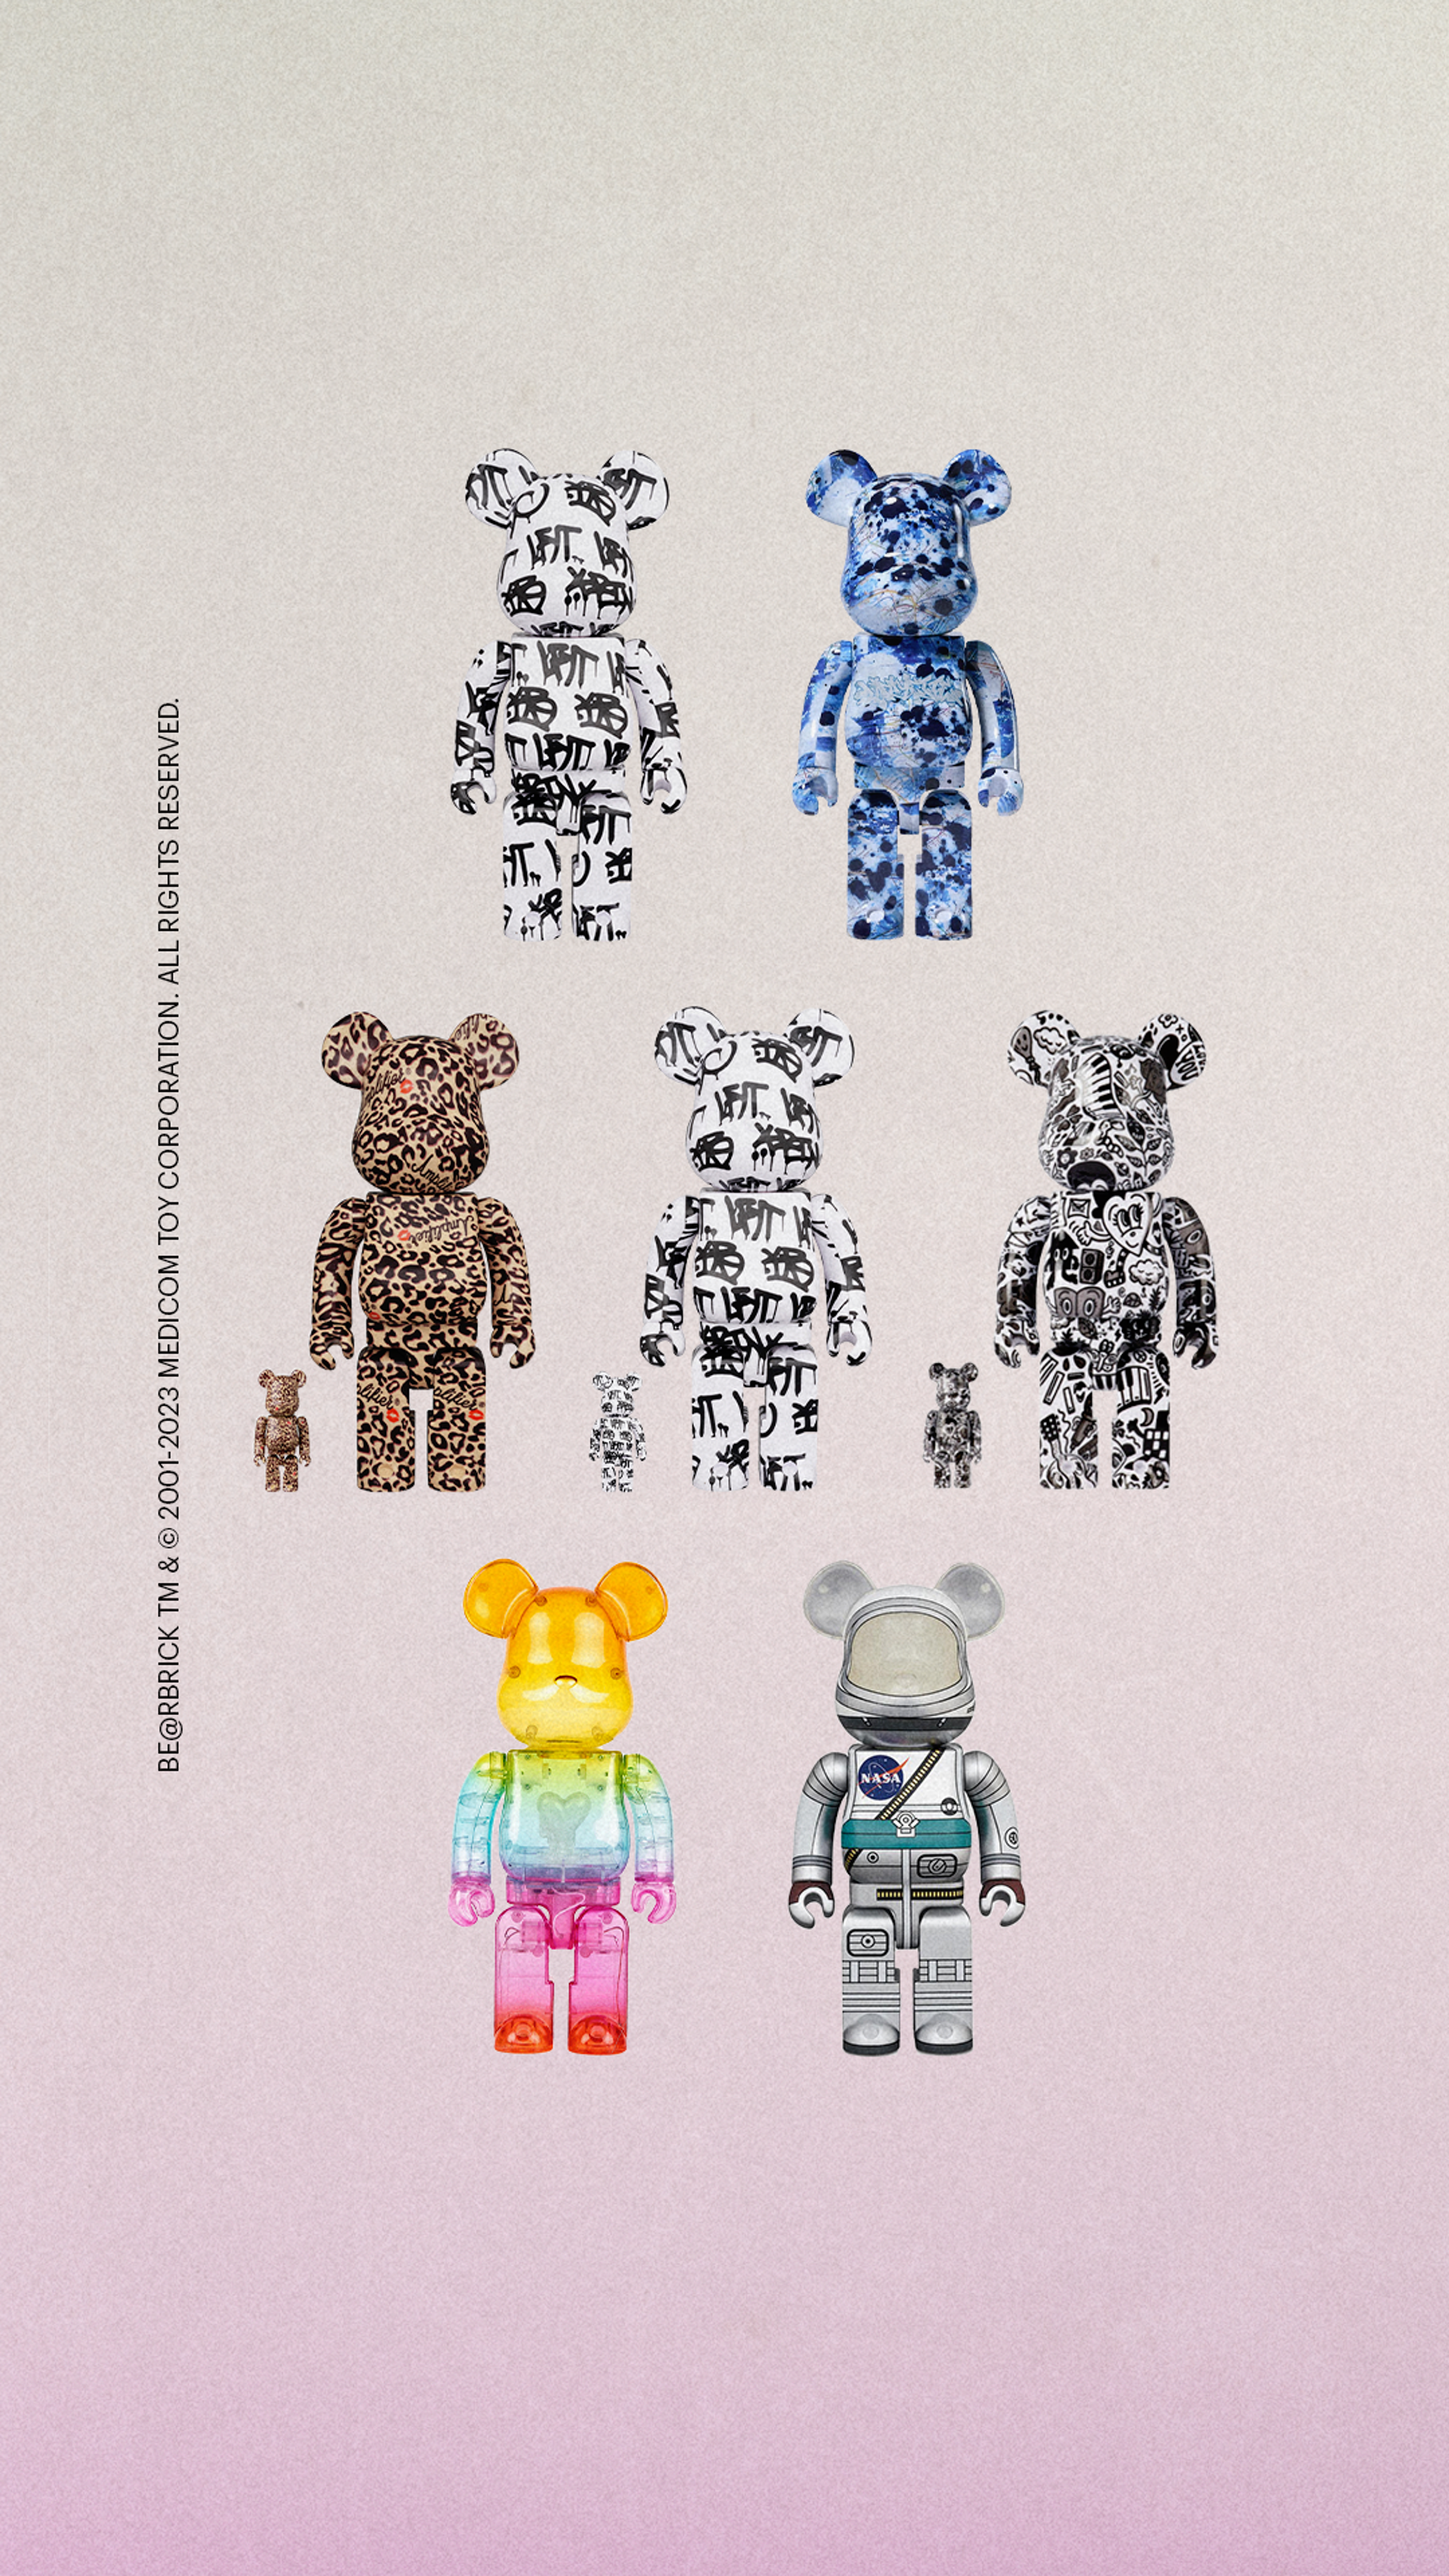 Preview image for the show titled "BE@RBRICK" at April 20, 2024